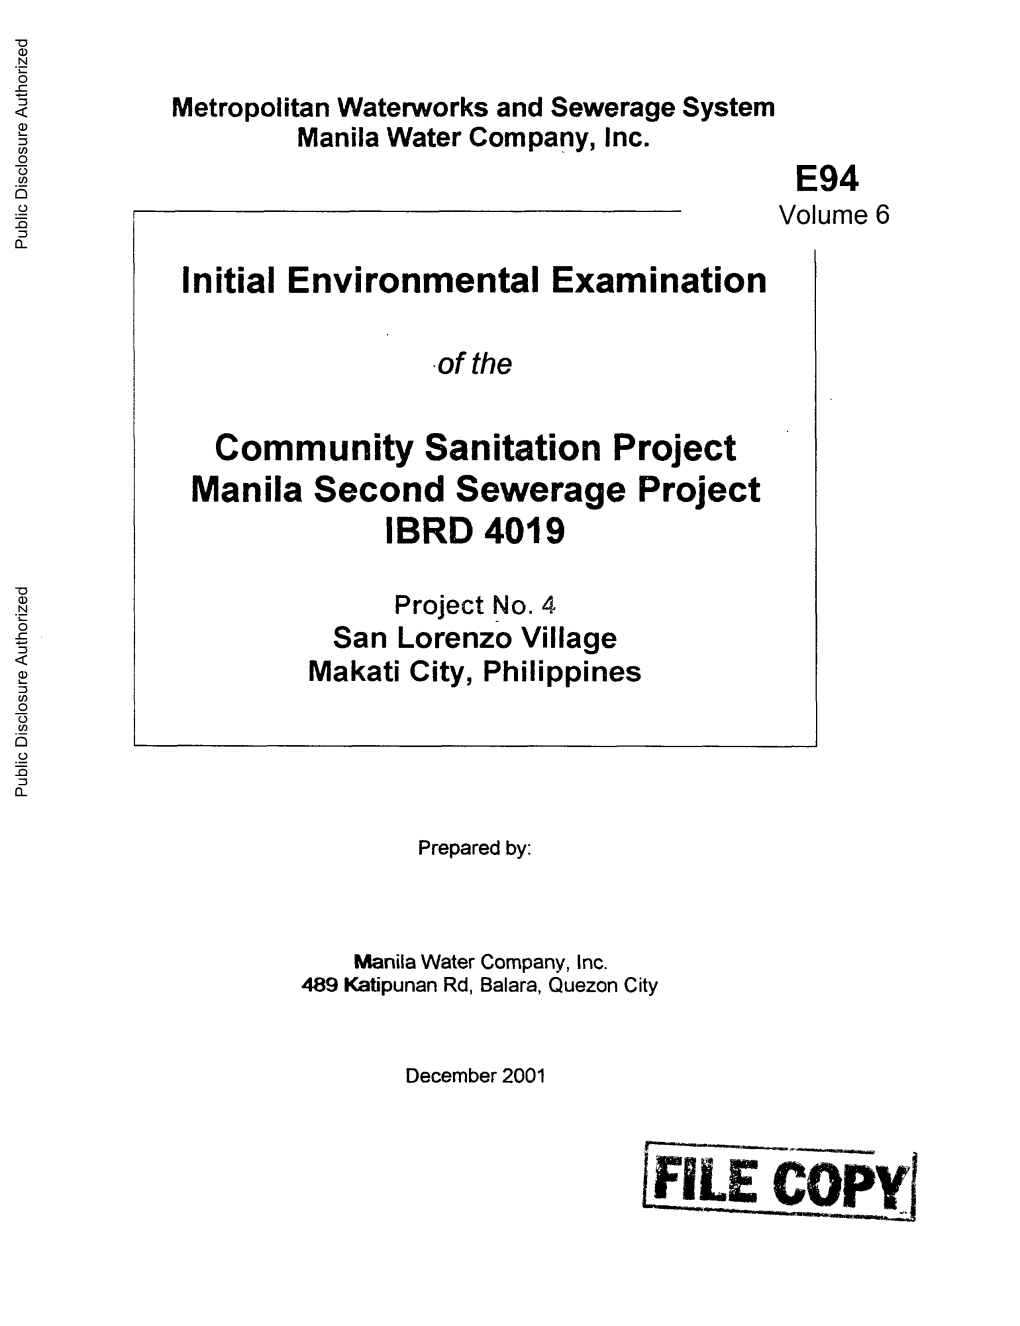 Waterworks and Sewerage System Manila Water Company, Inc